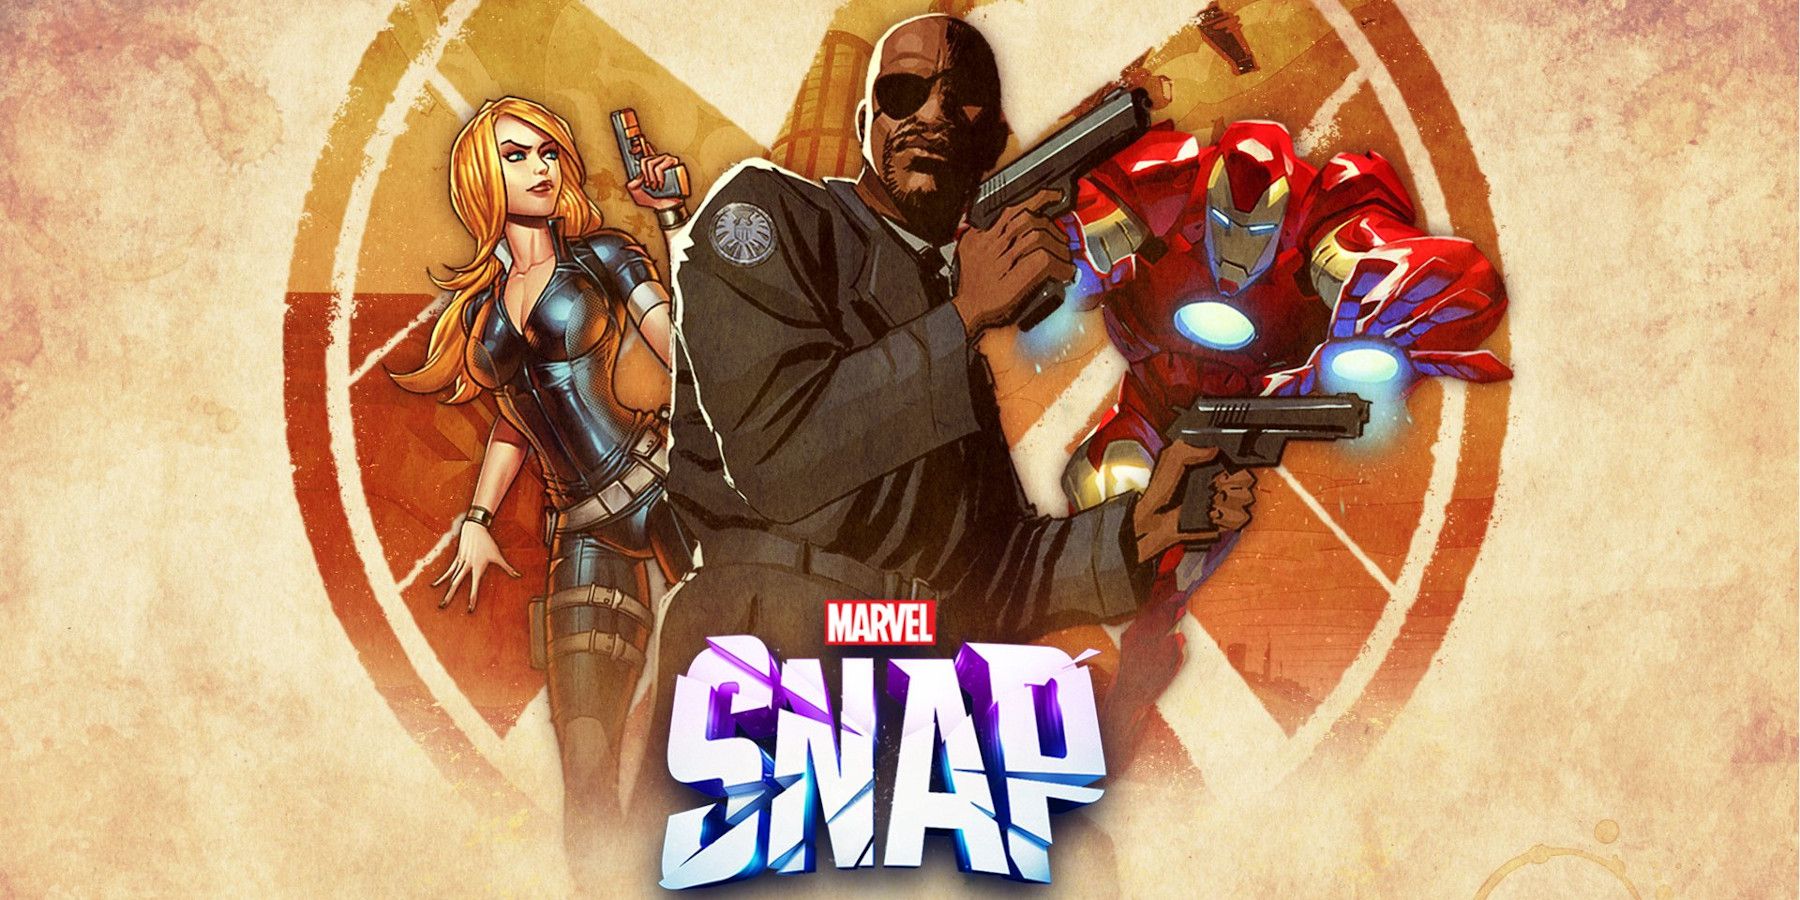 The List Of The 76 Pool 3 Cards In 'Marvel Snap' You Need To Collect